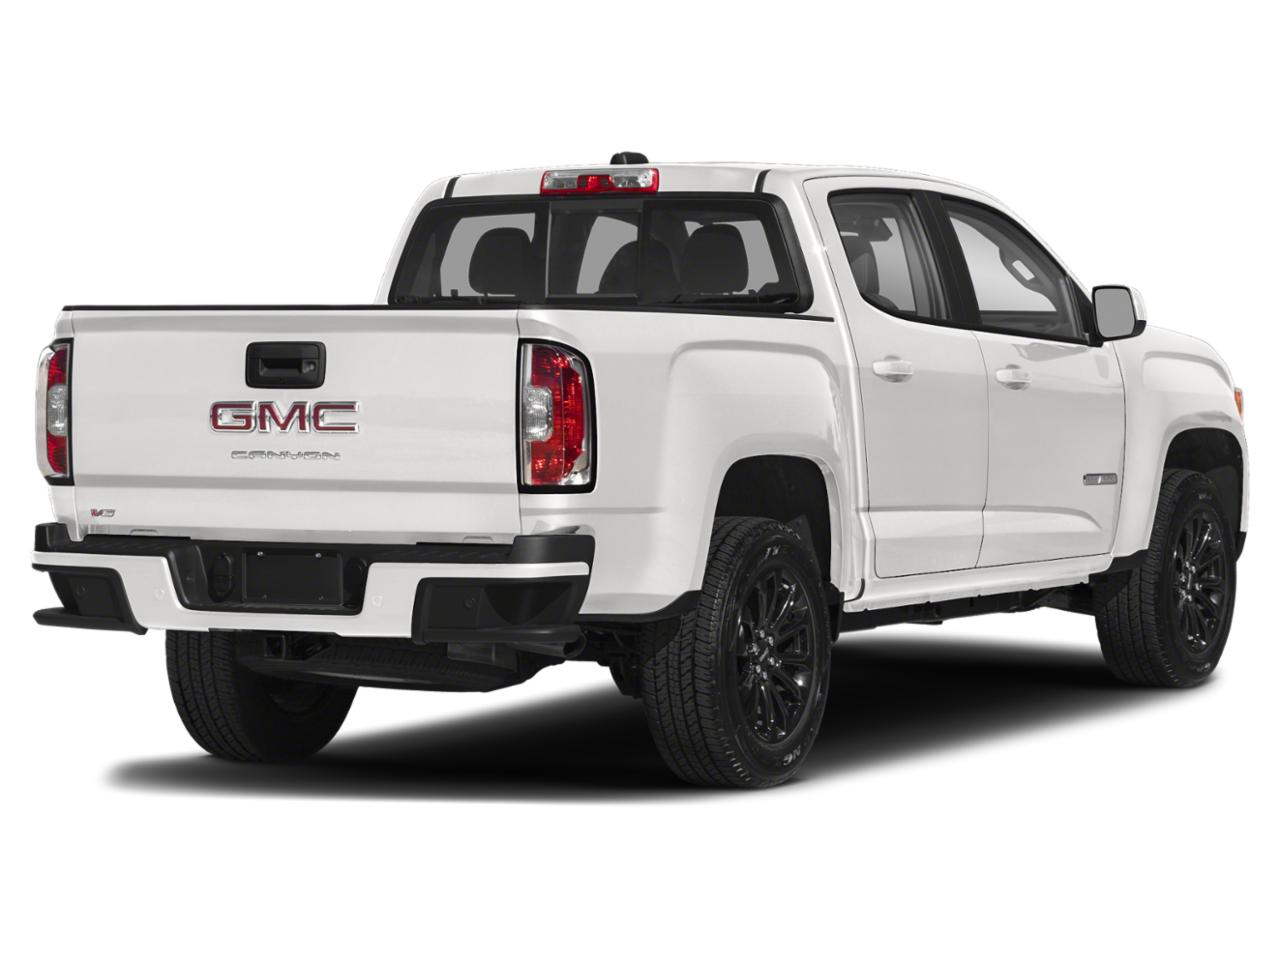 New 2022 Gmc Canyon Crew Cab Short Box 4 Wheel Drive Elevation In White